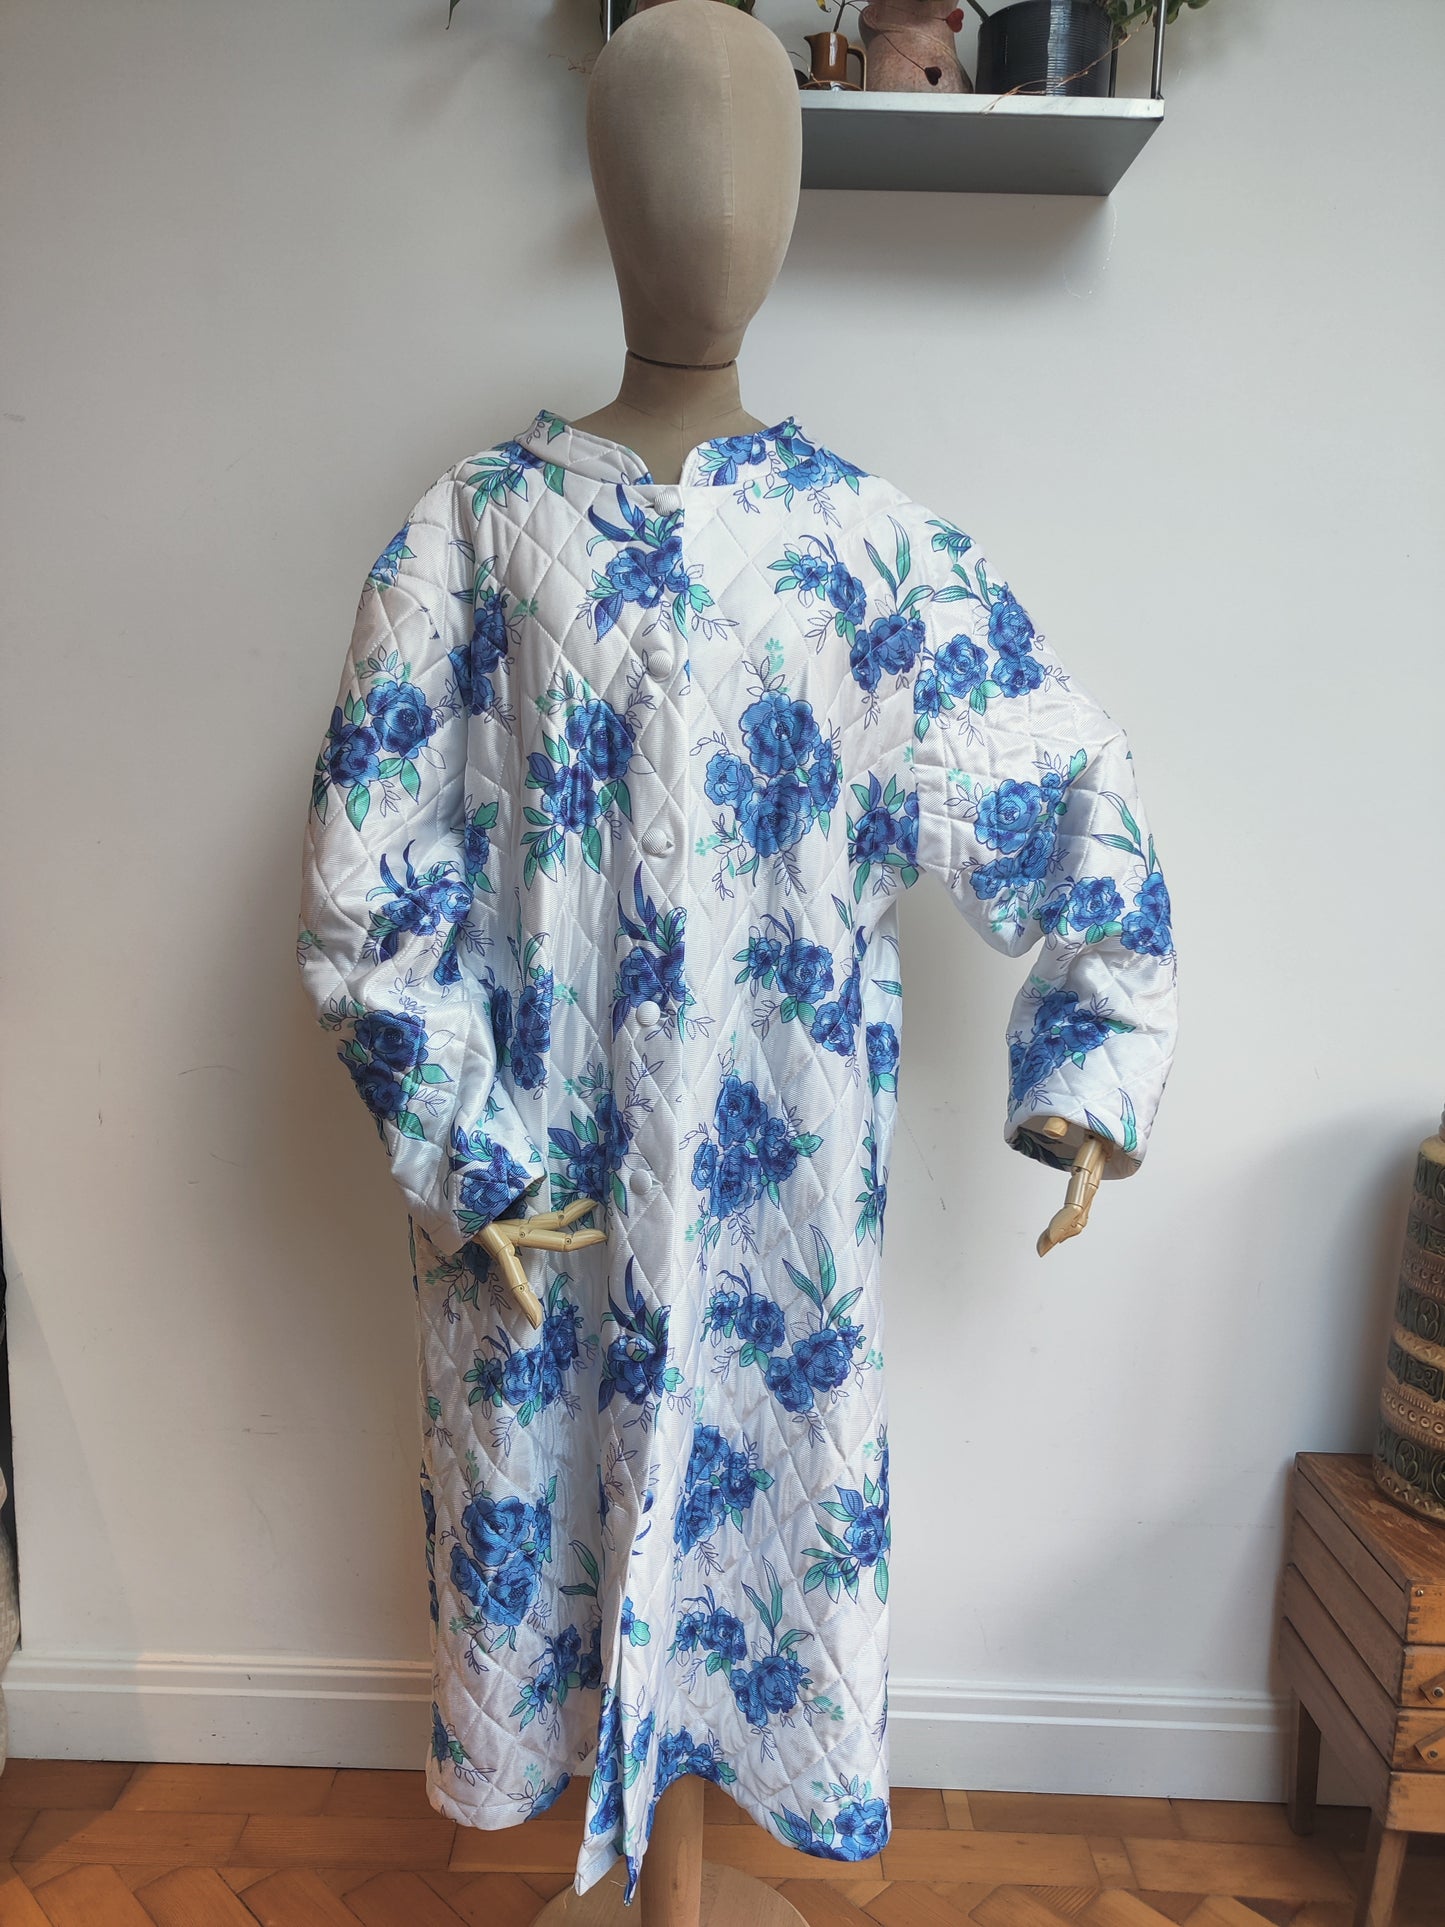 Gorgeous quilted housecoat in blue floral print